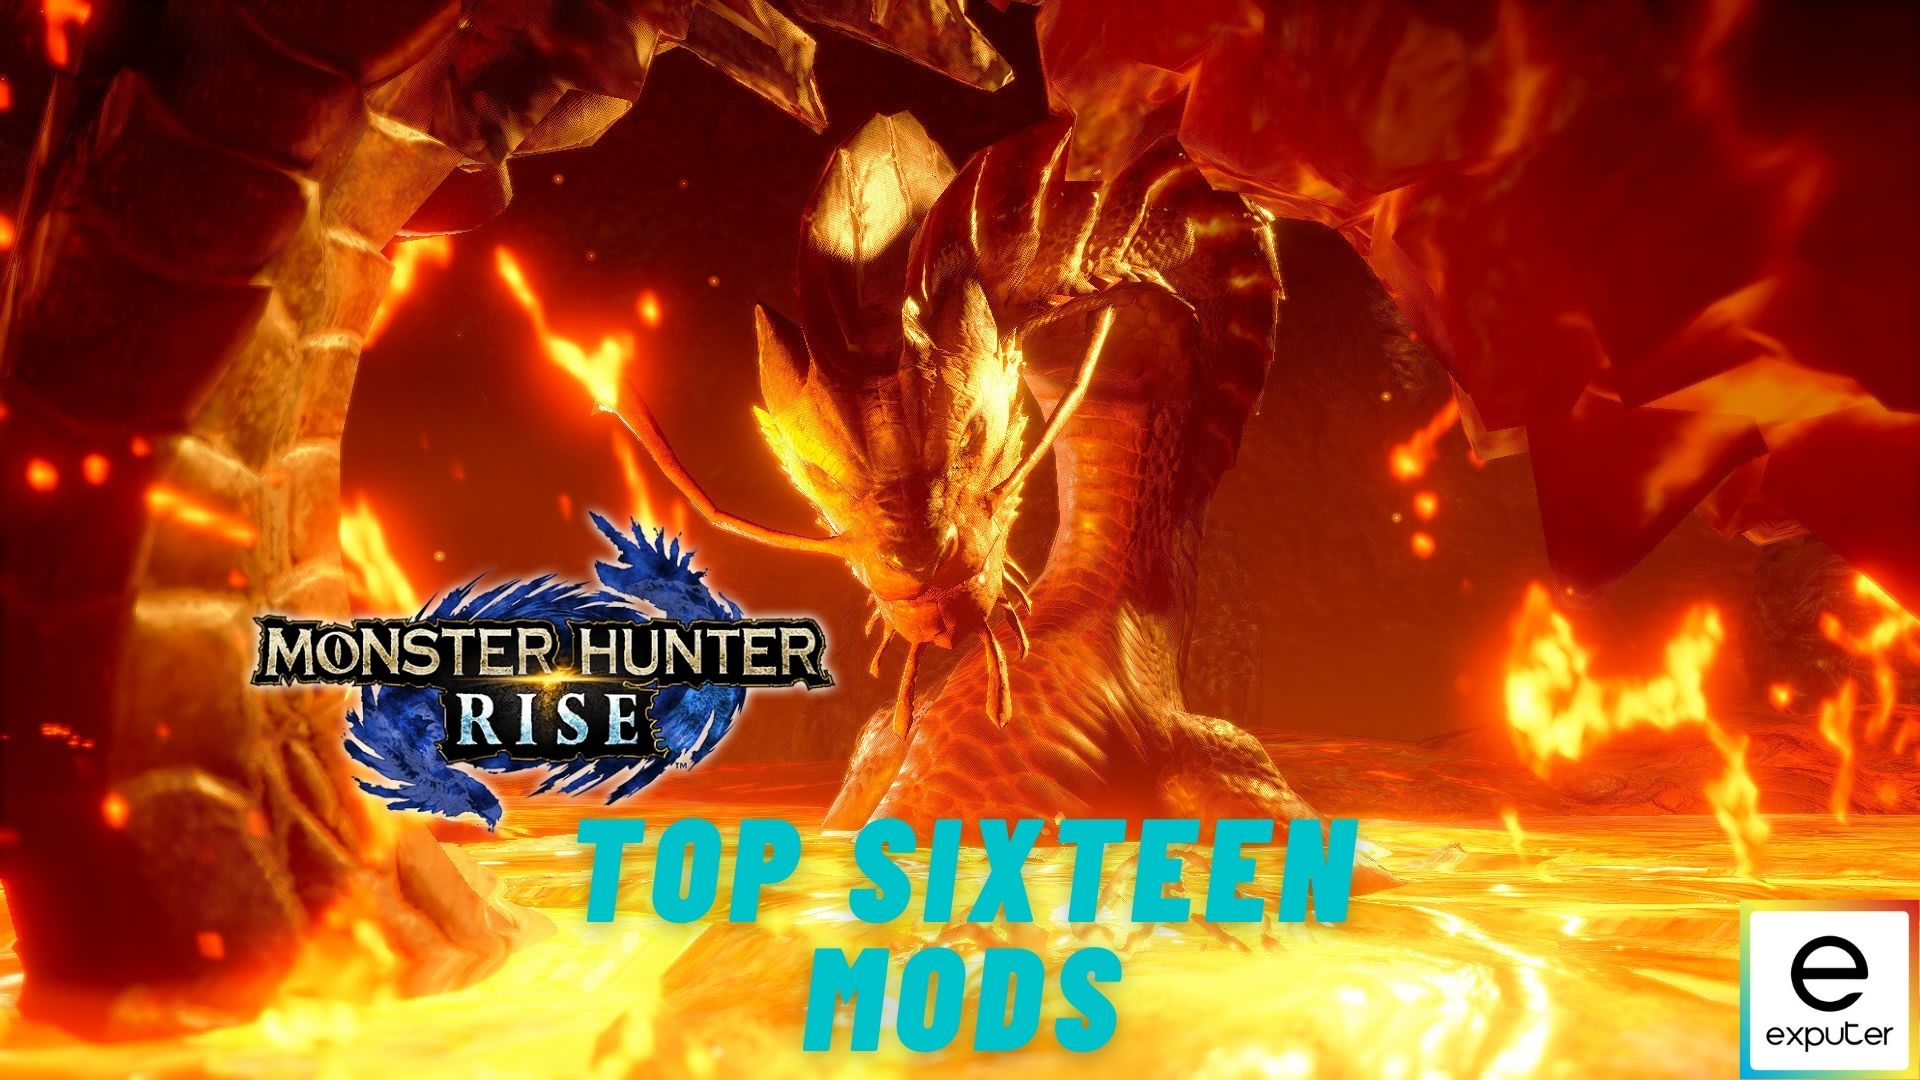 Monster Hunter Rise Overlay Mod Introduces Monster HP Meter and More